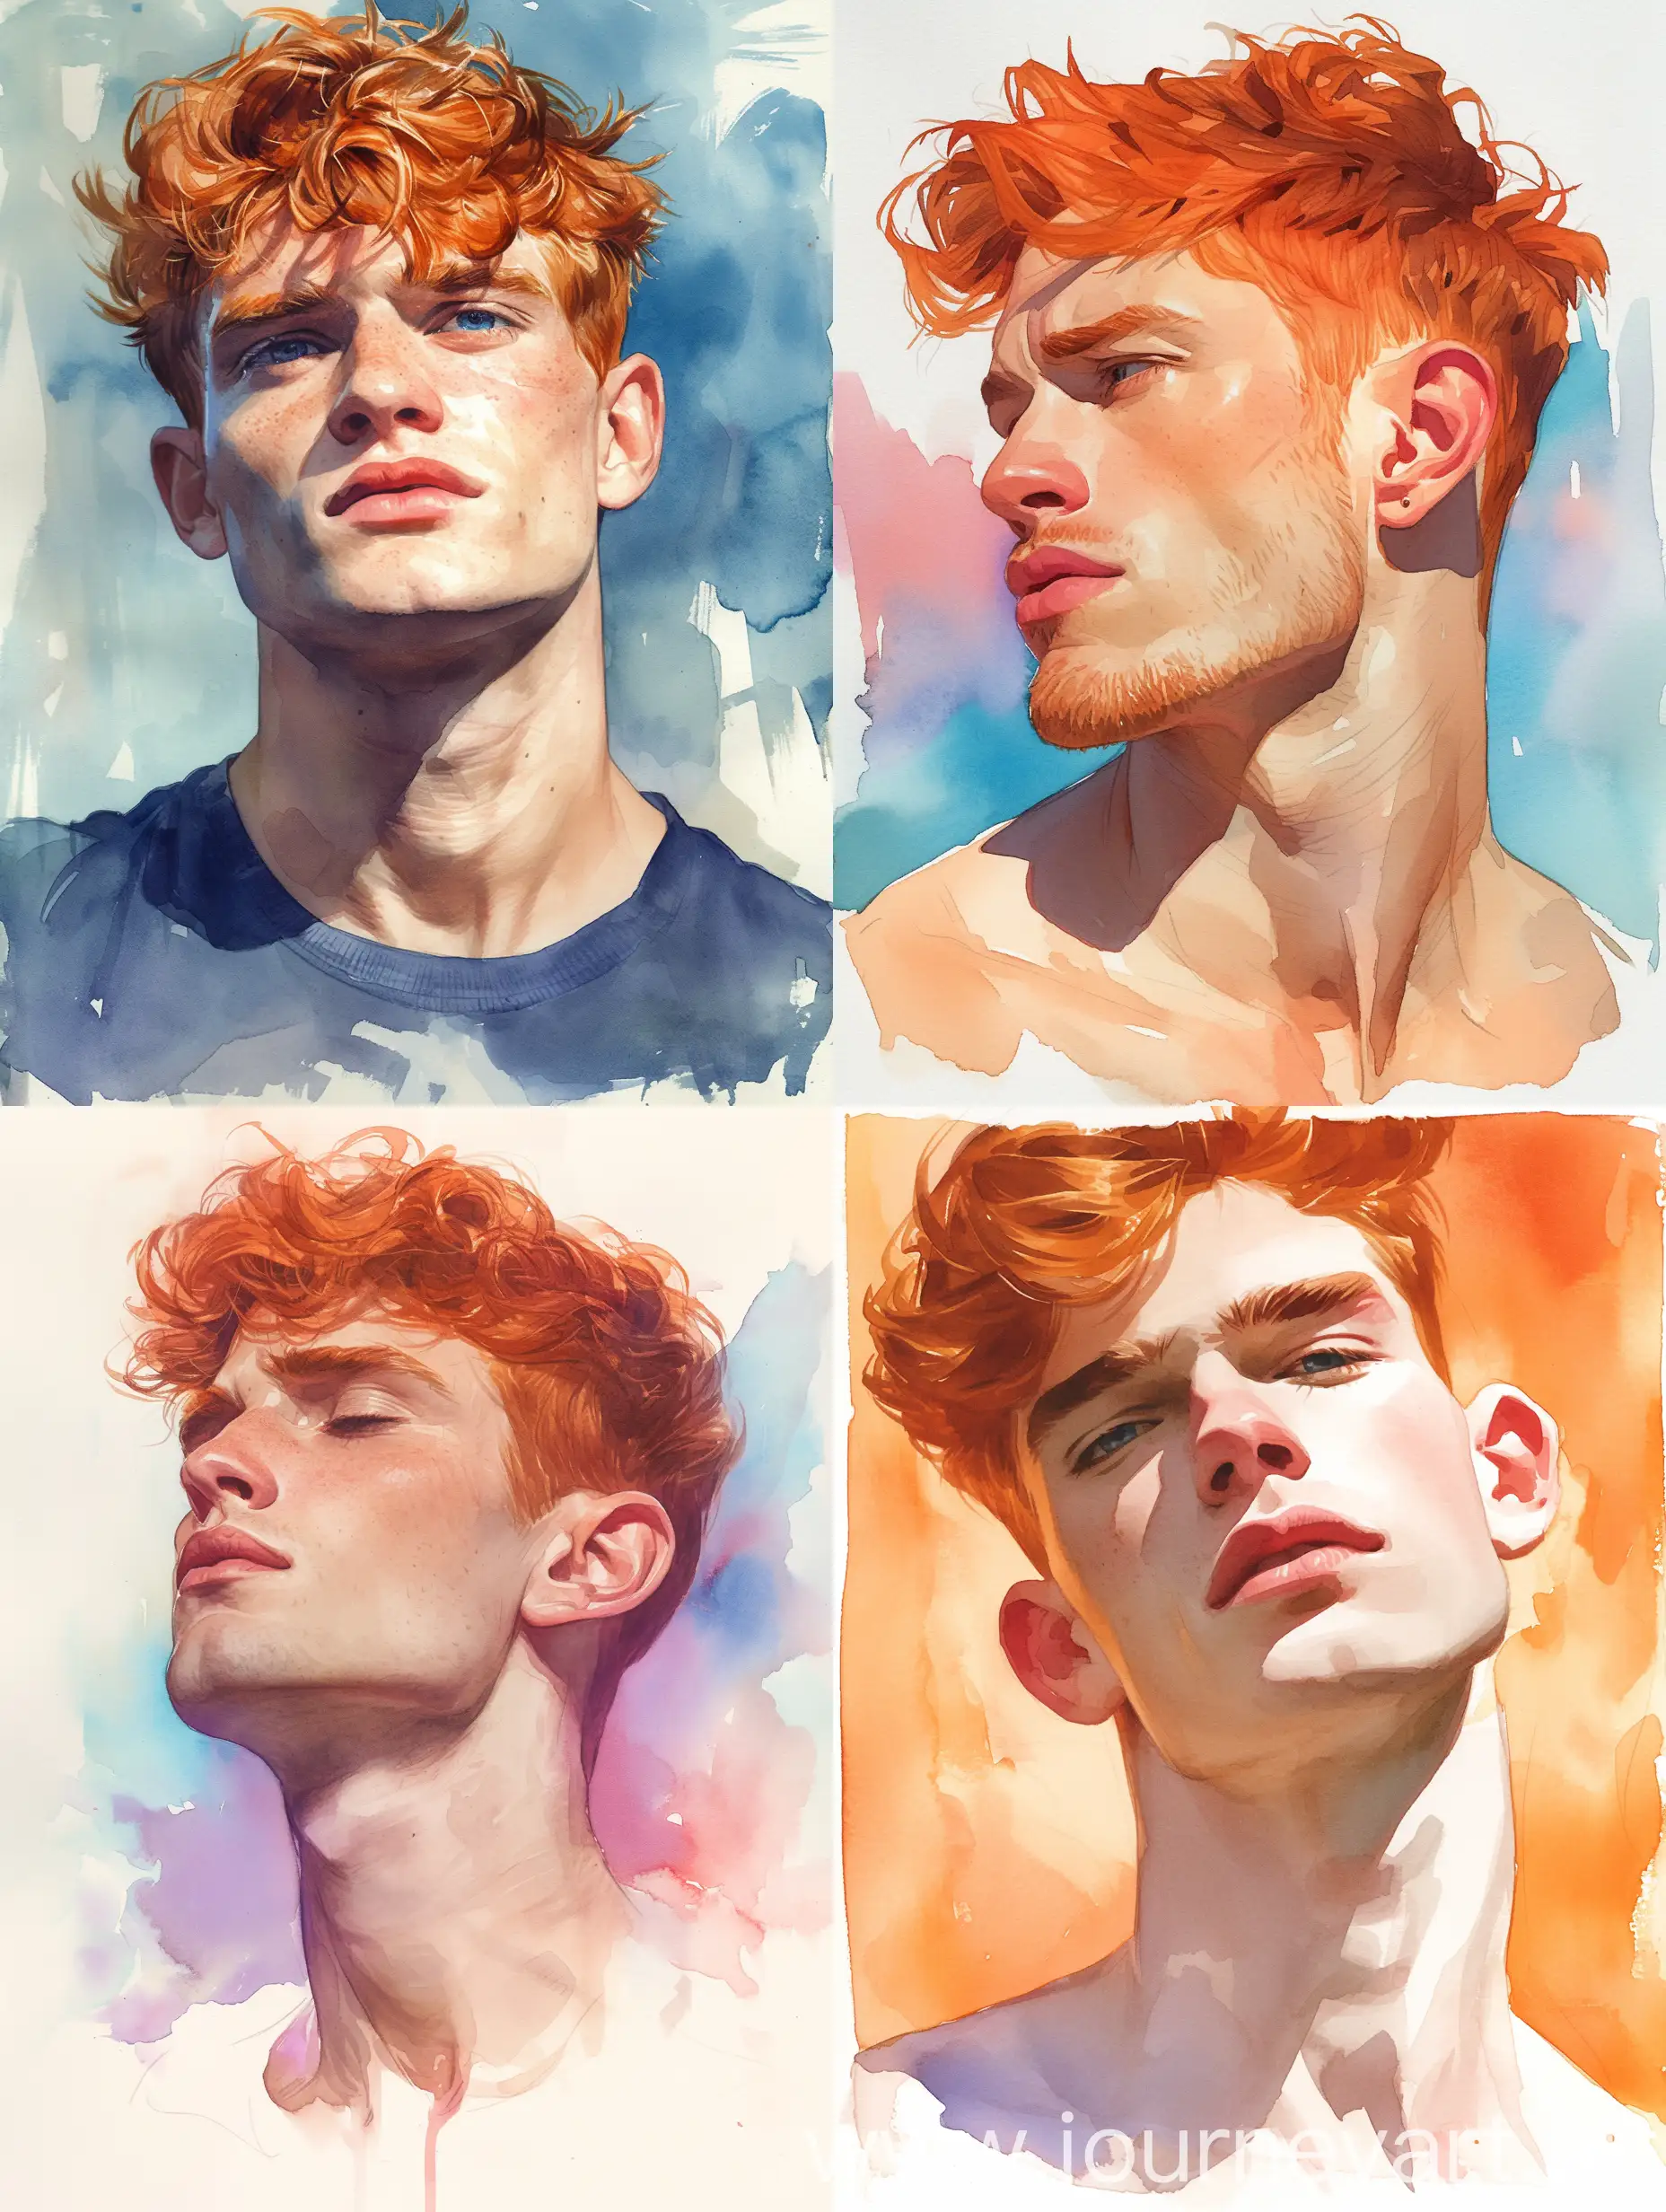 Vibrant-Watercolor-Portrait-of-a-Man-with-Orange-Hair-on-Colorful-Background